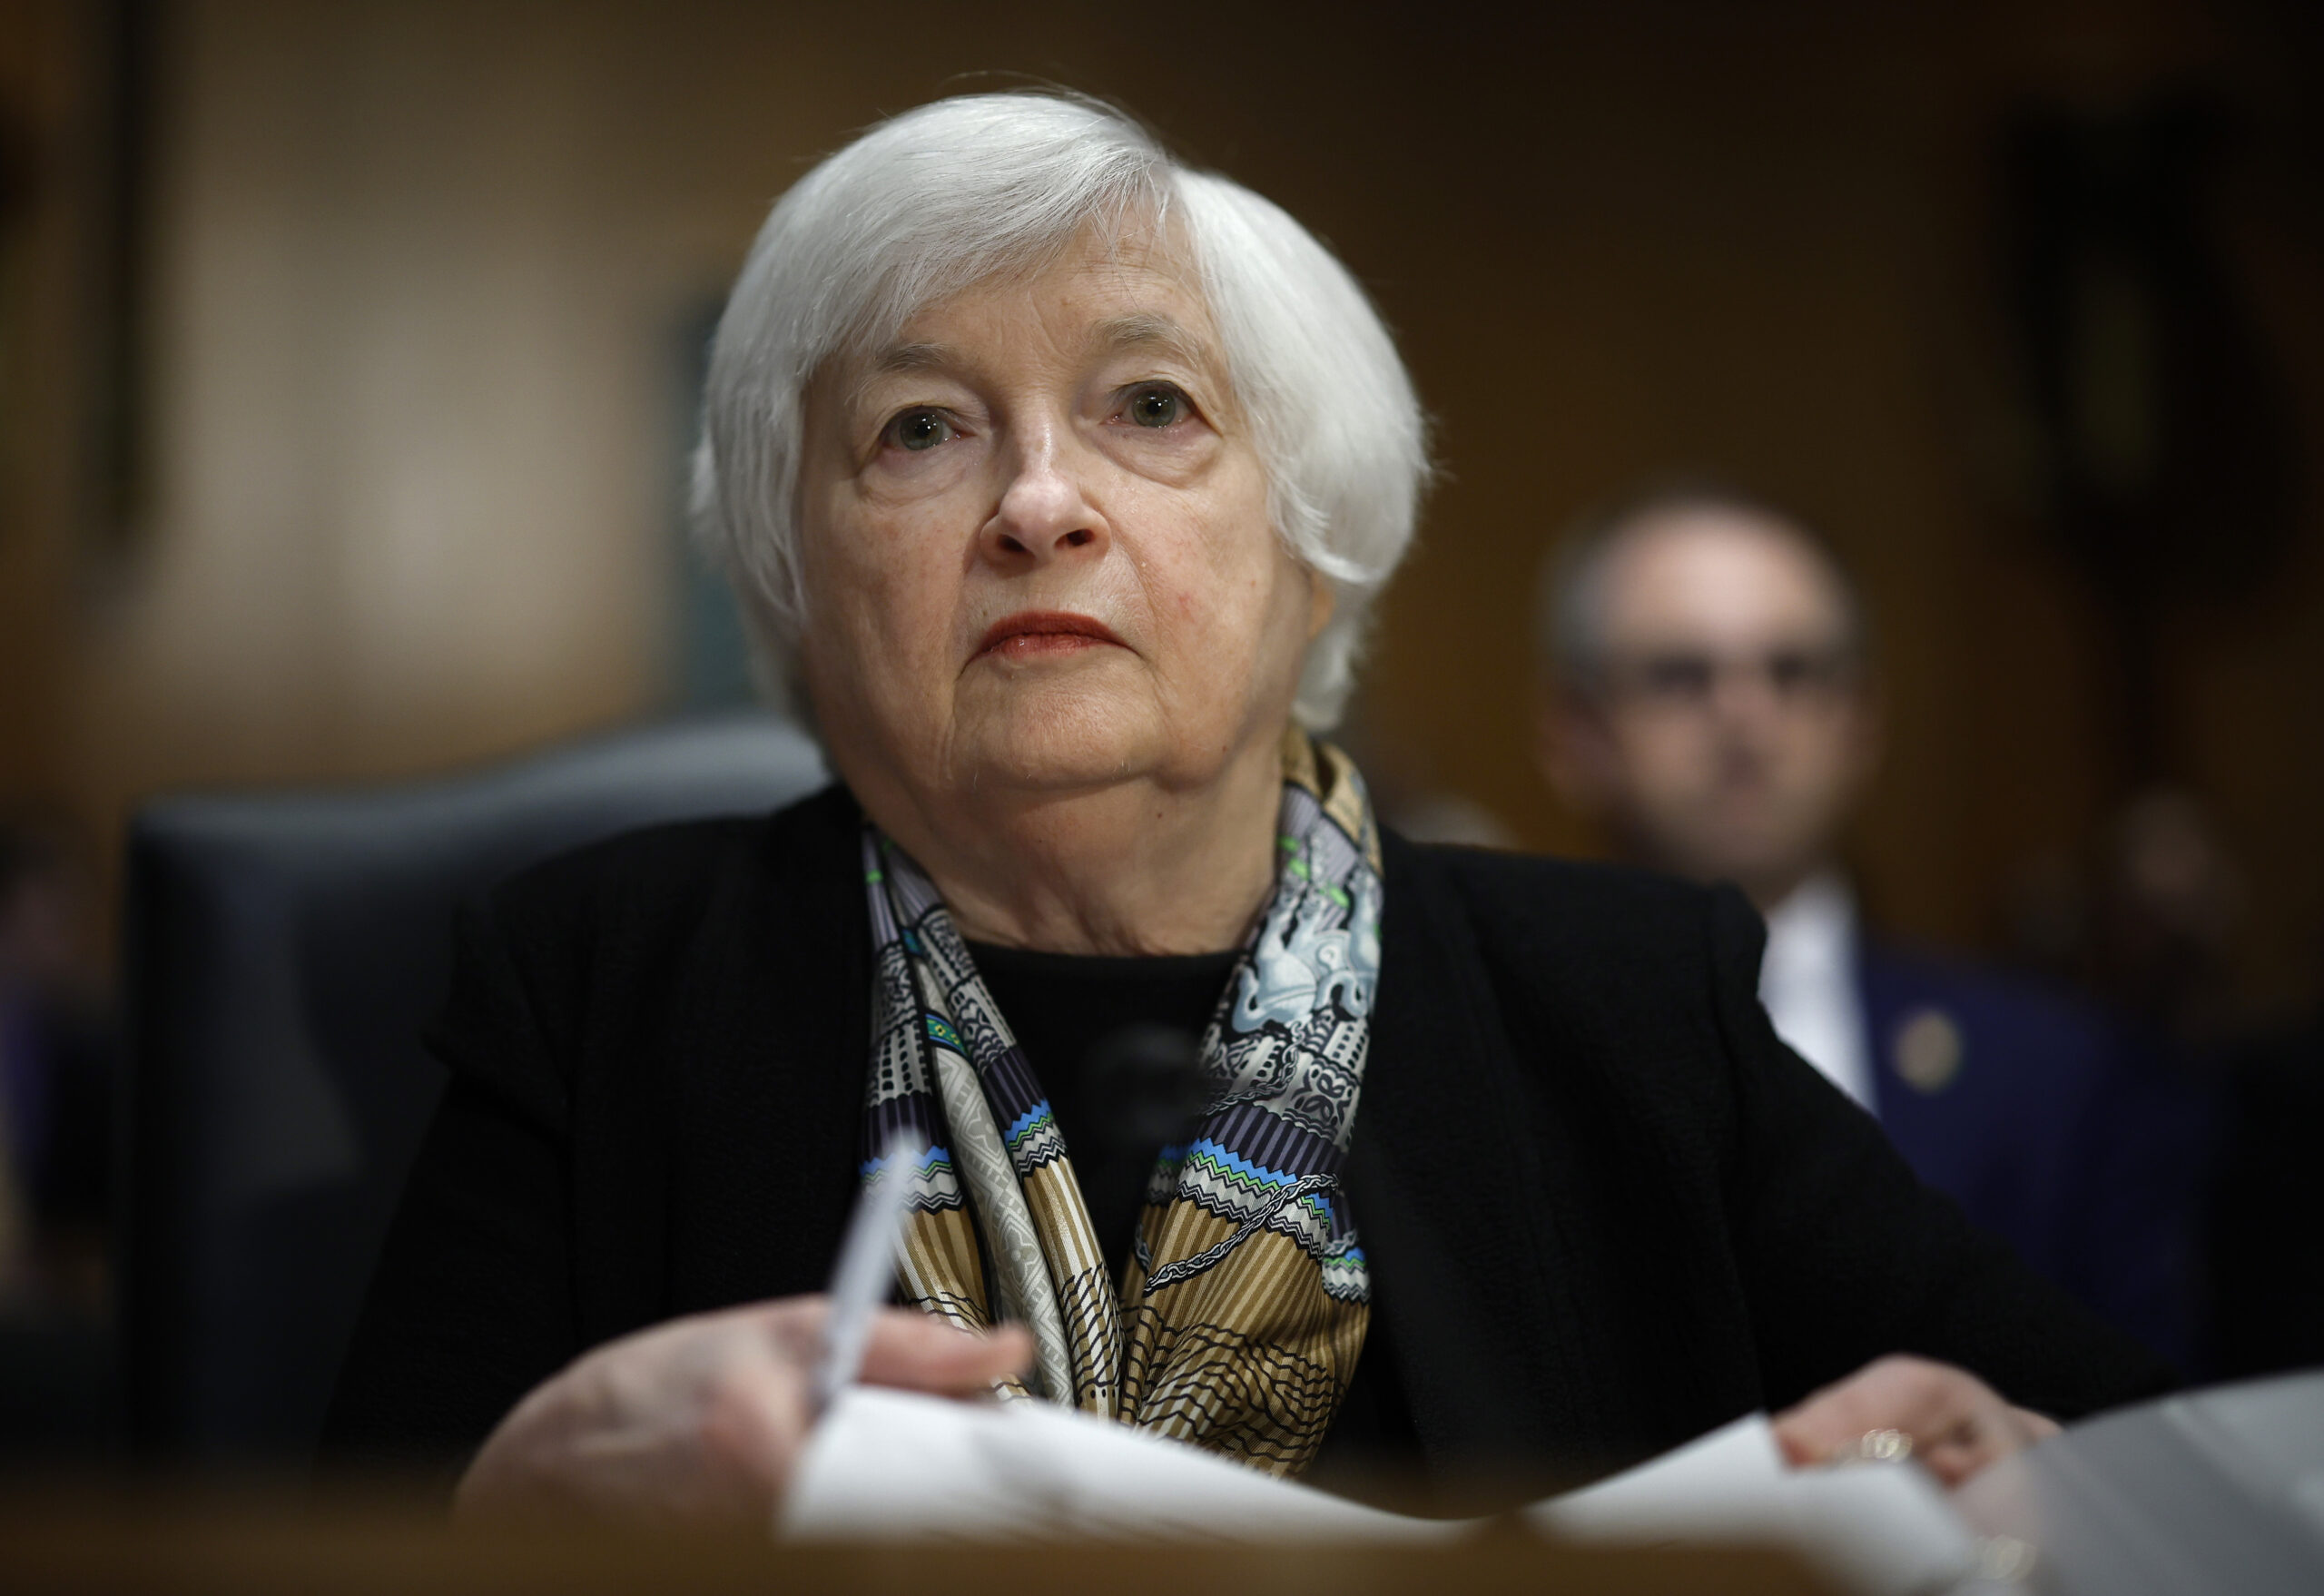 Yellen Tells Lawmakers That The American Banking System ‘Remains Sound’ After Two Banks Collapse